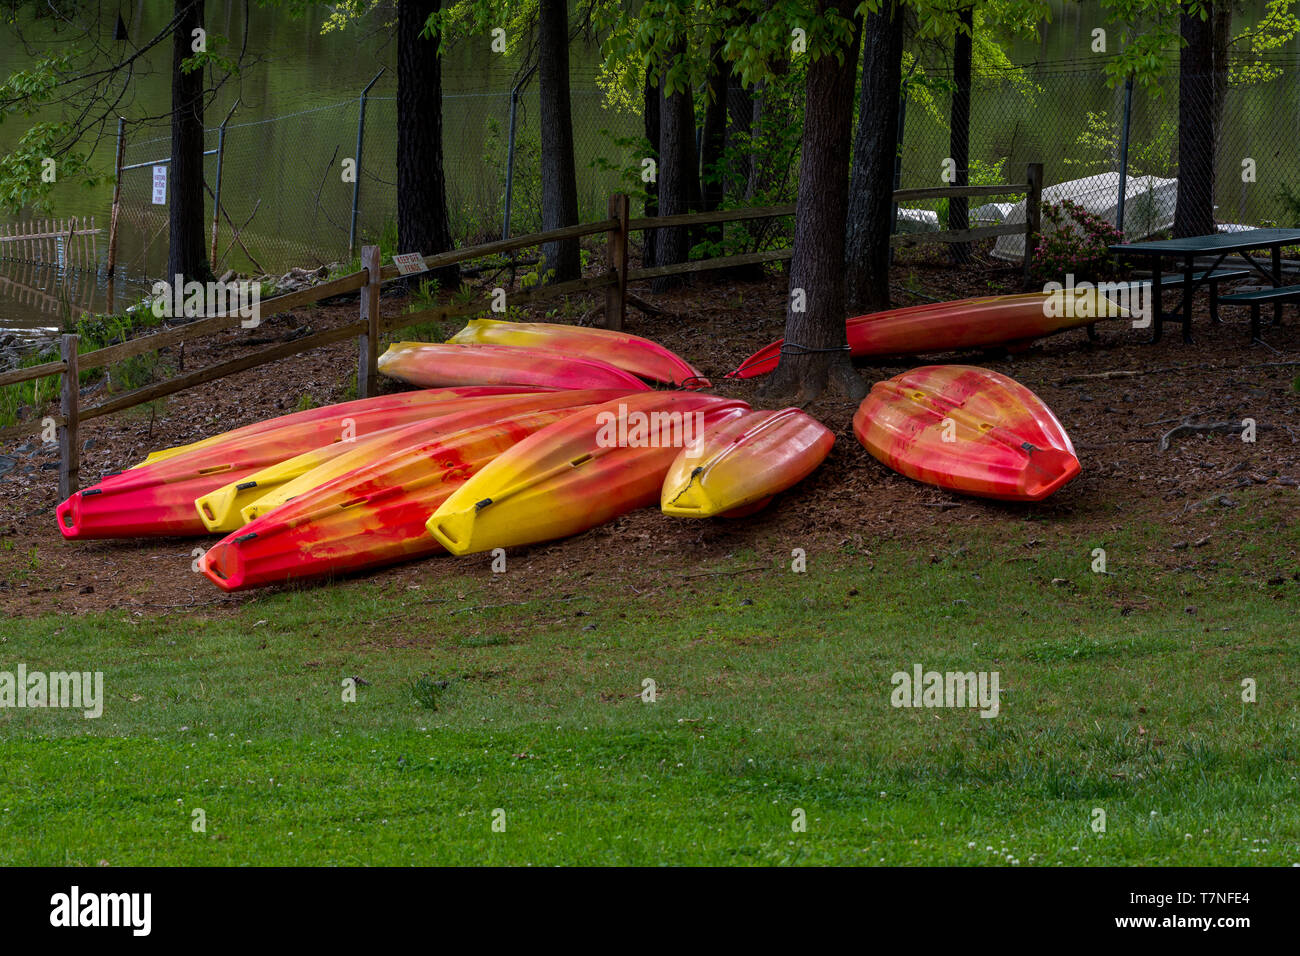 Orange and yellow kayaks stored upside down on grass with lake in the background Stock Photo